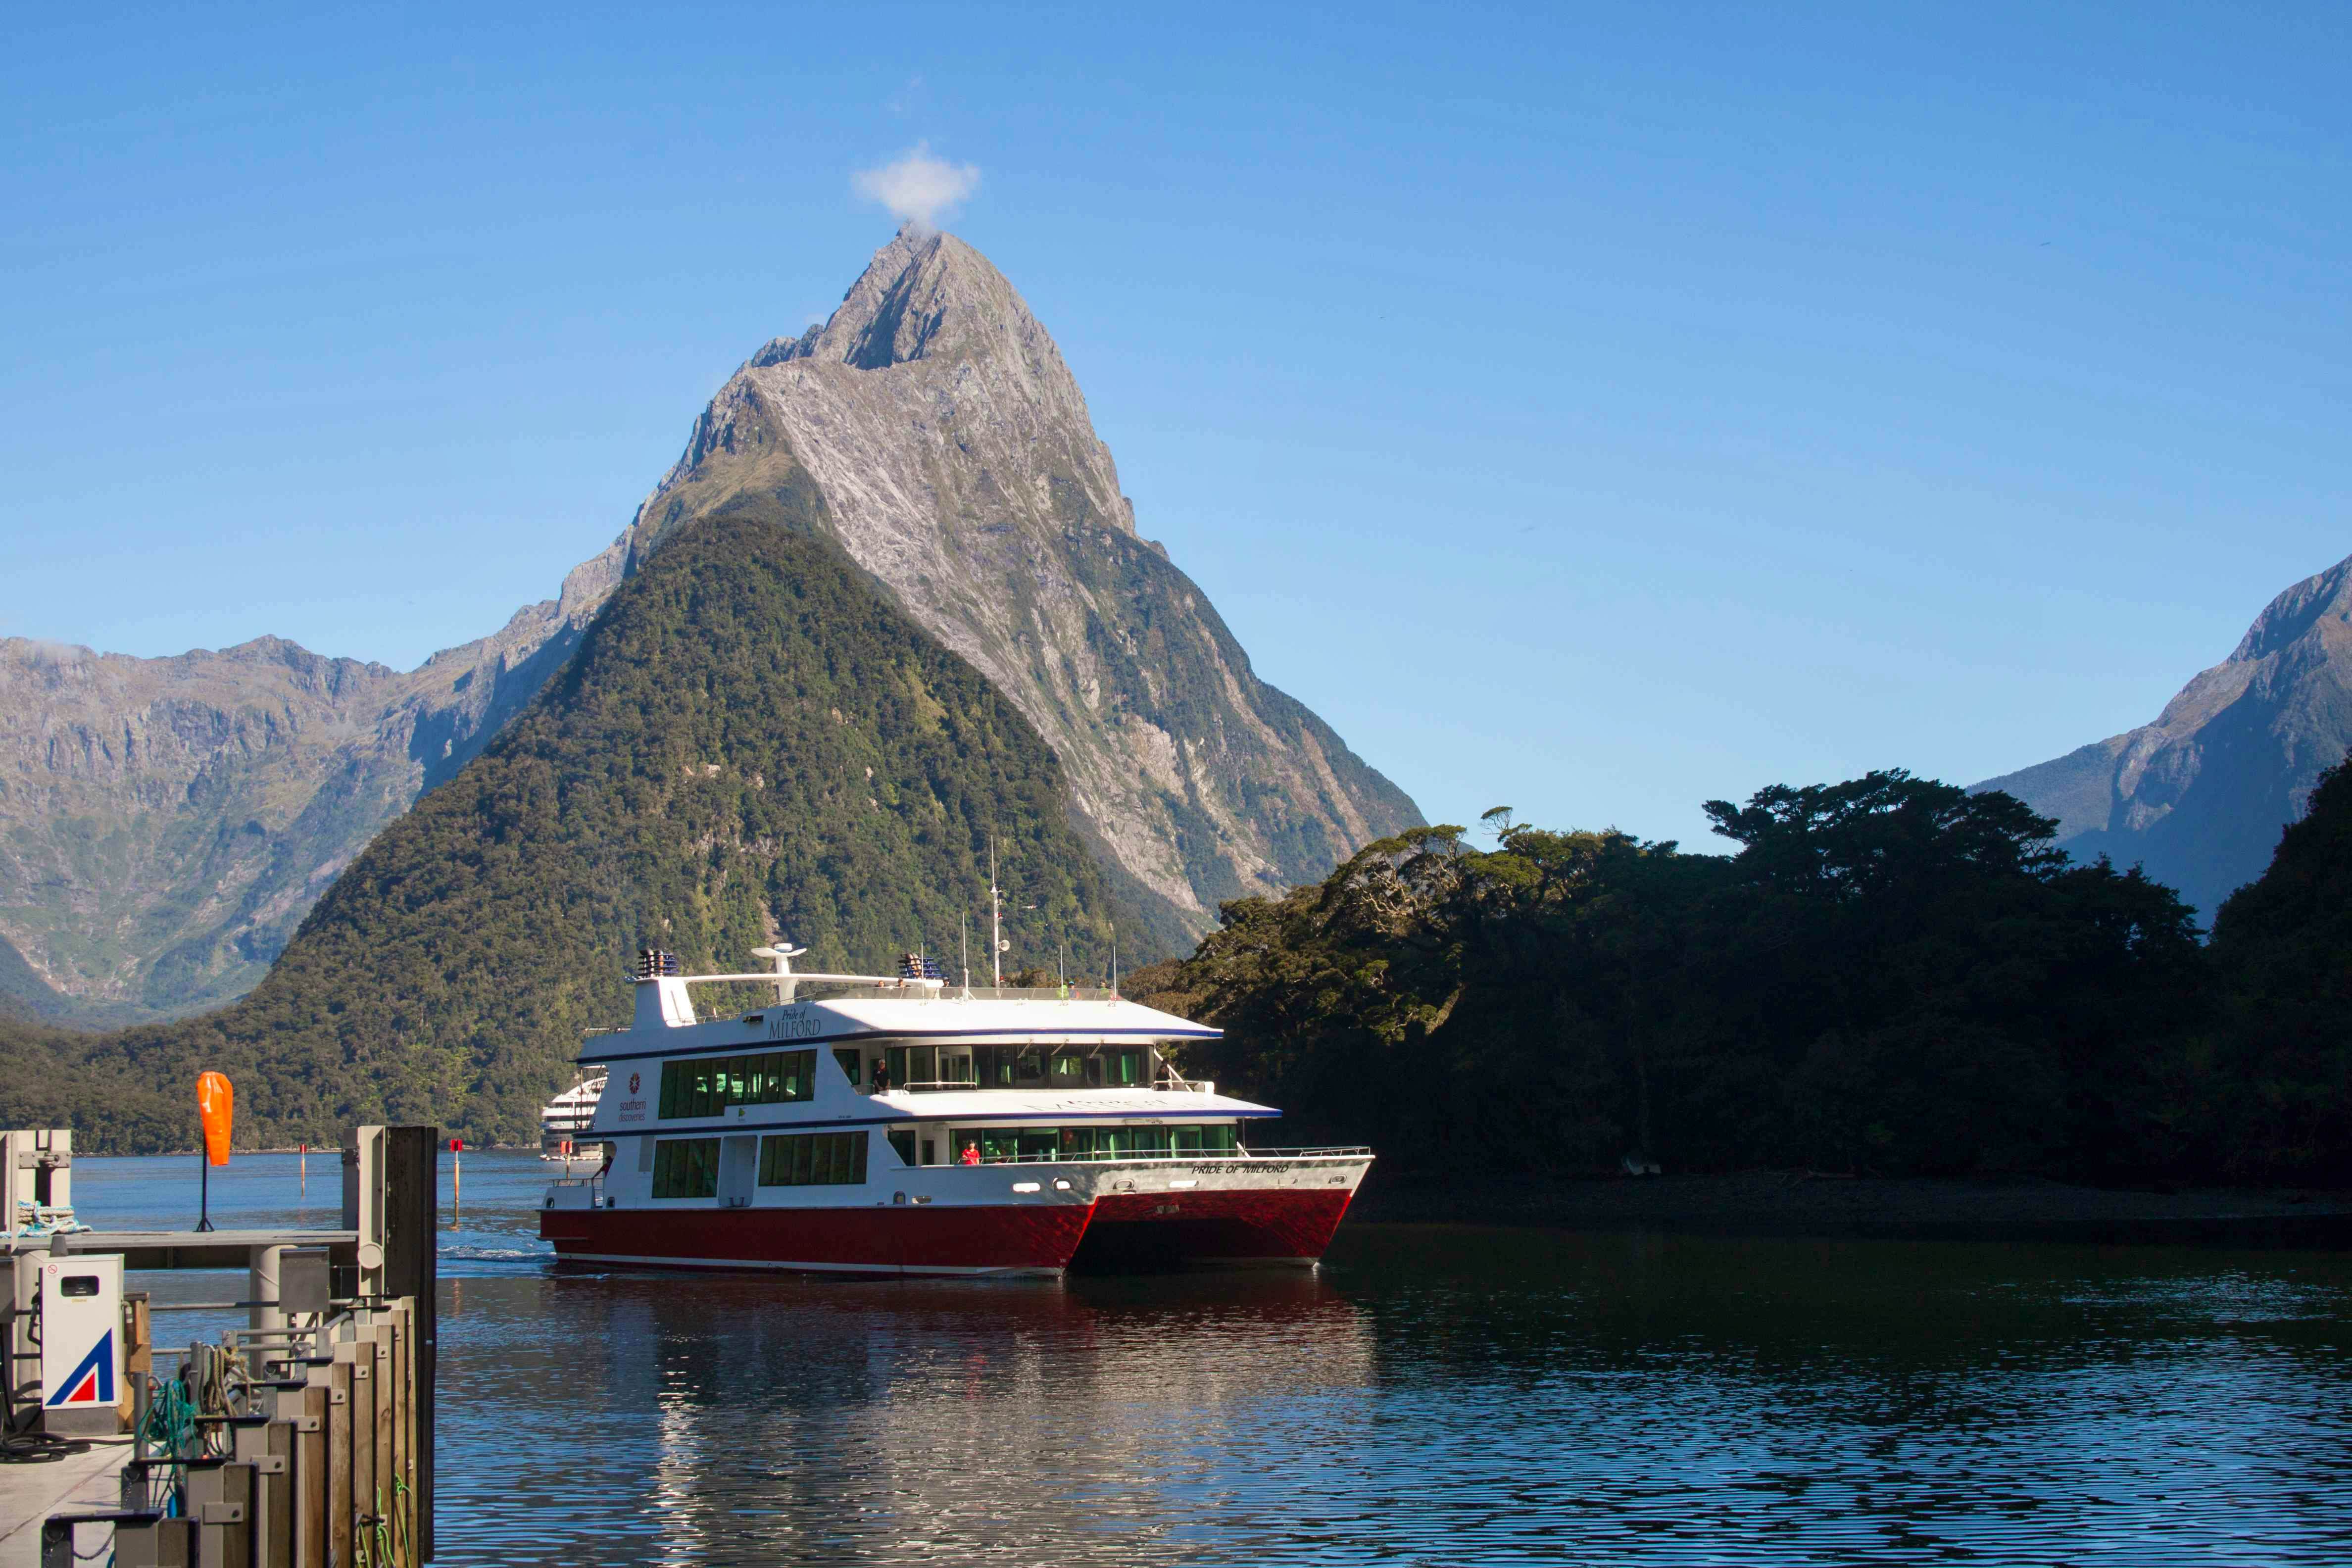 Luxuriating in the beauty of Milford Sound on the way to Queenstown